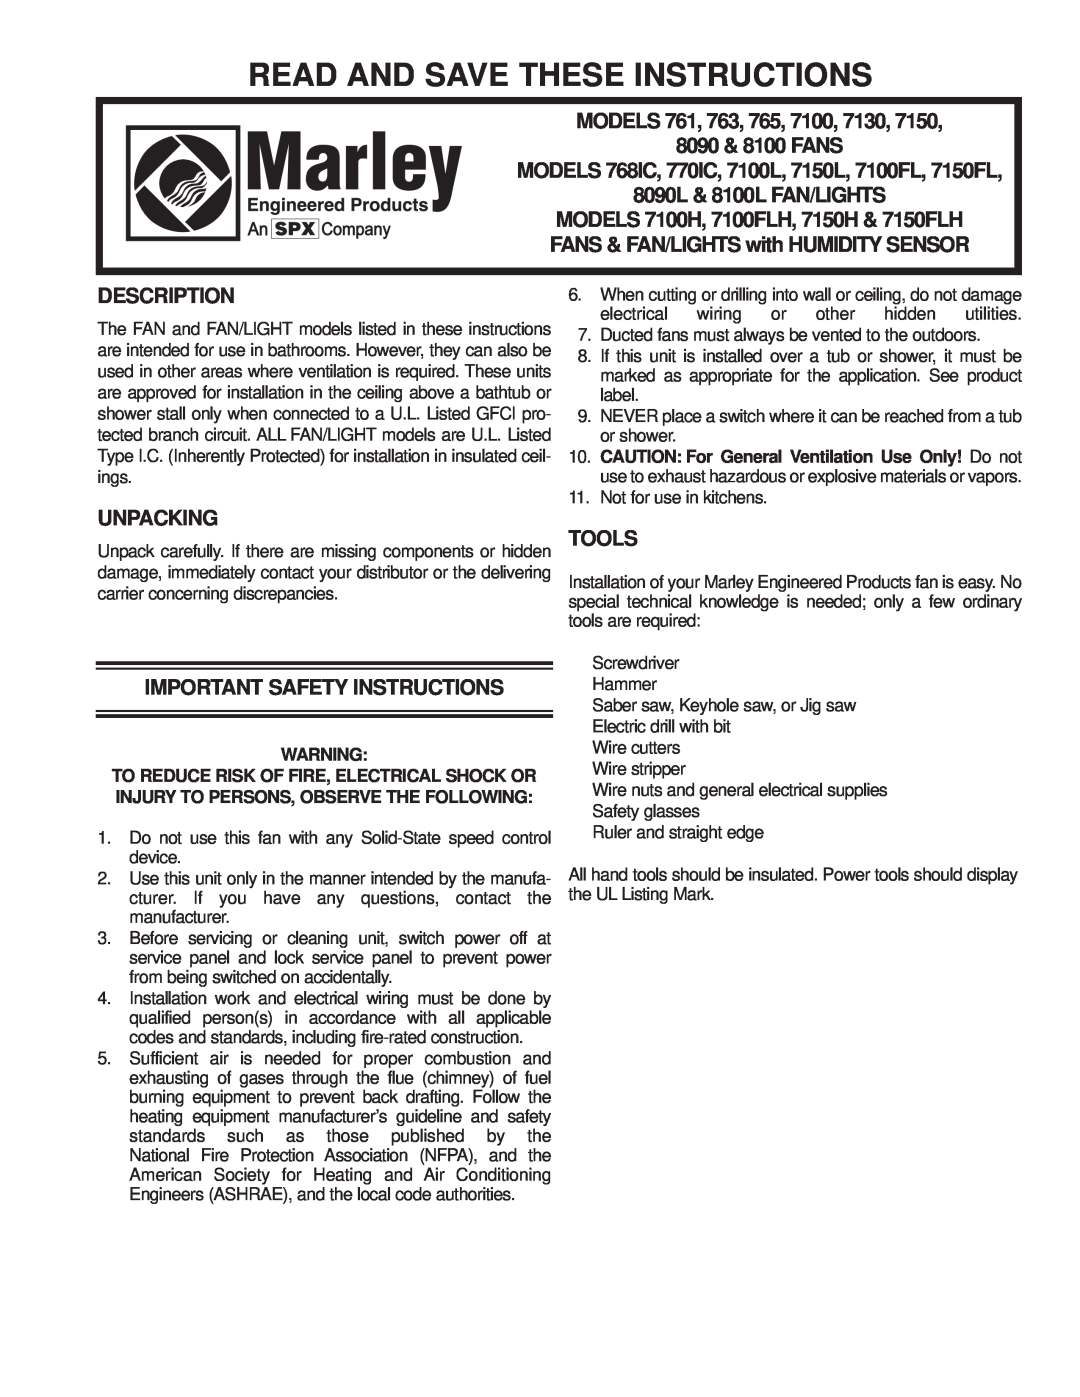 Marley Engineered Products 763 important safety instructions Read And Save These Instructions, Models, 8090 & 8100 FANS 